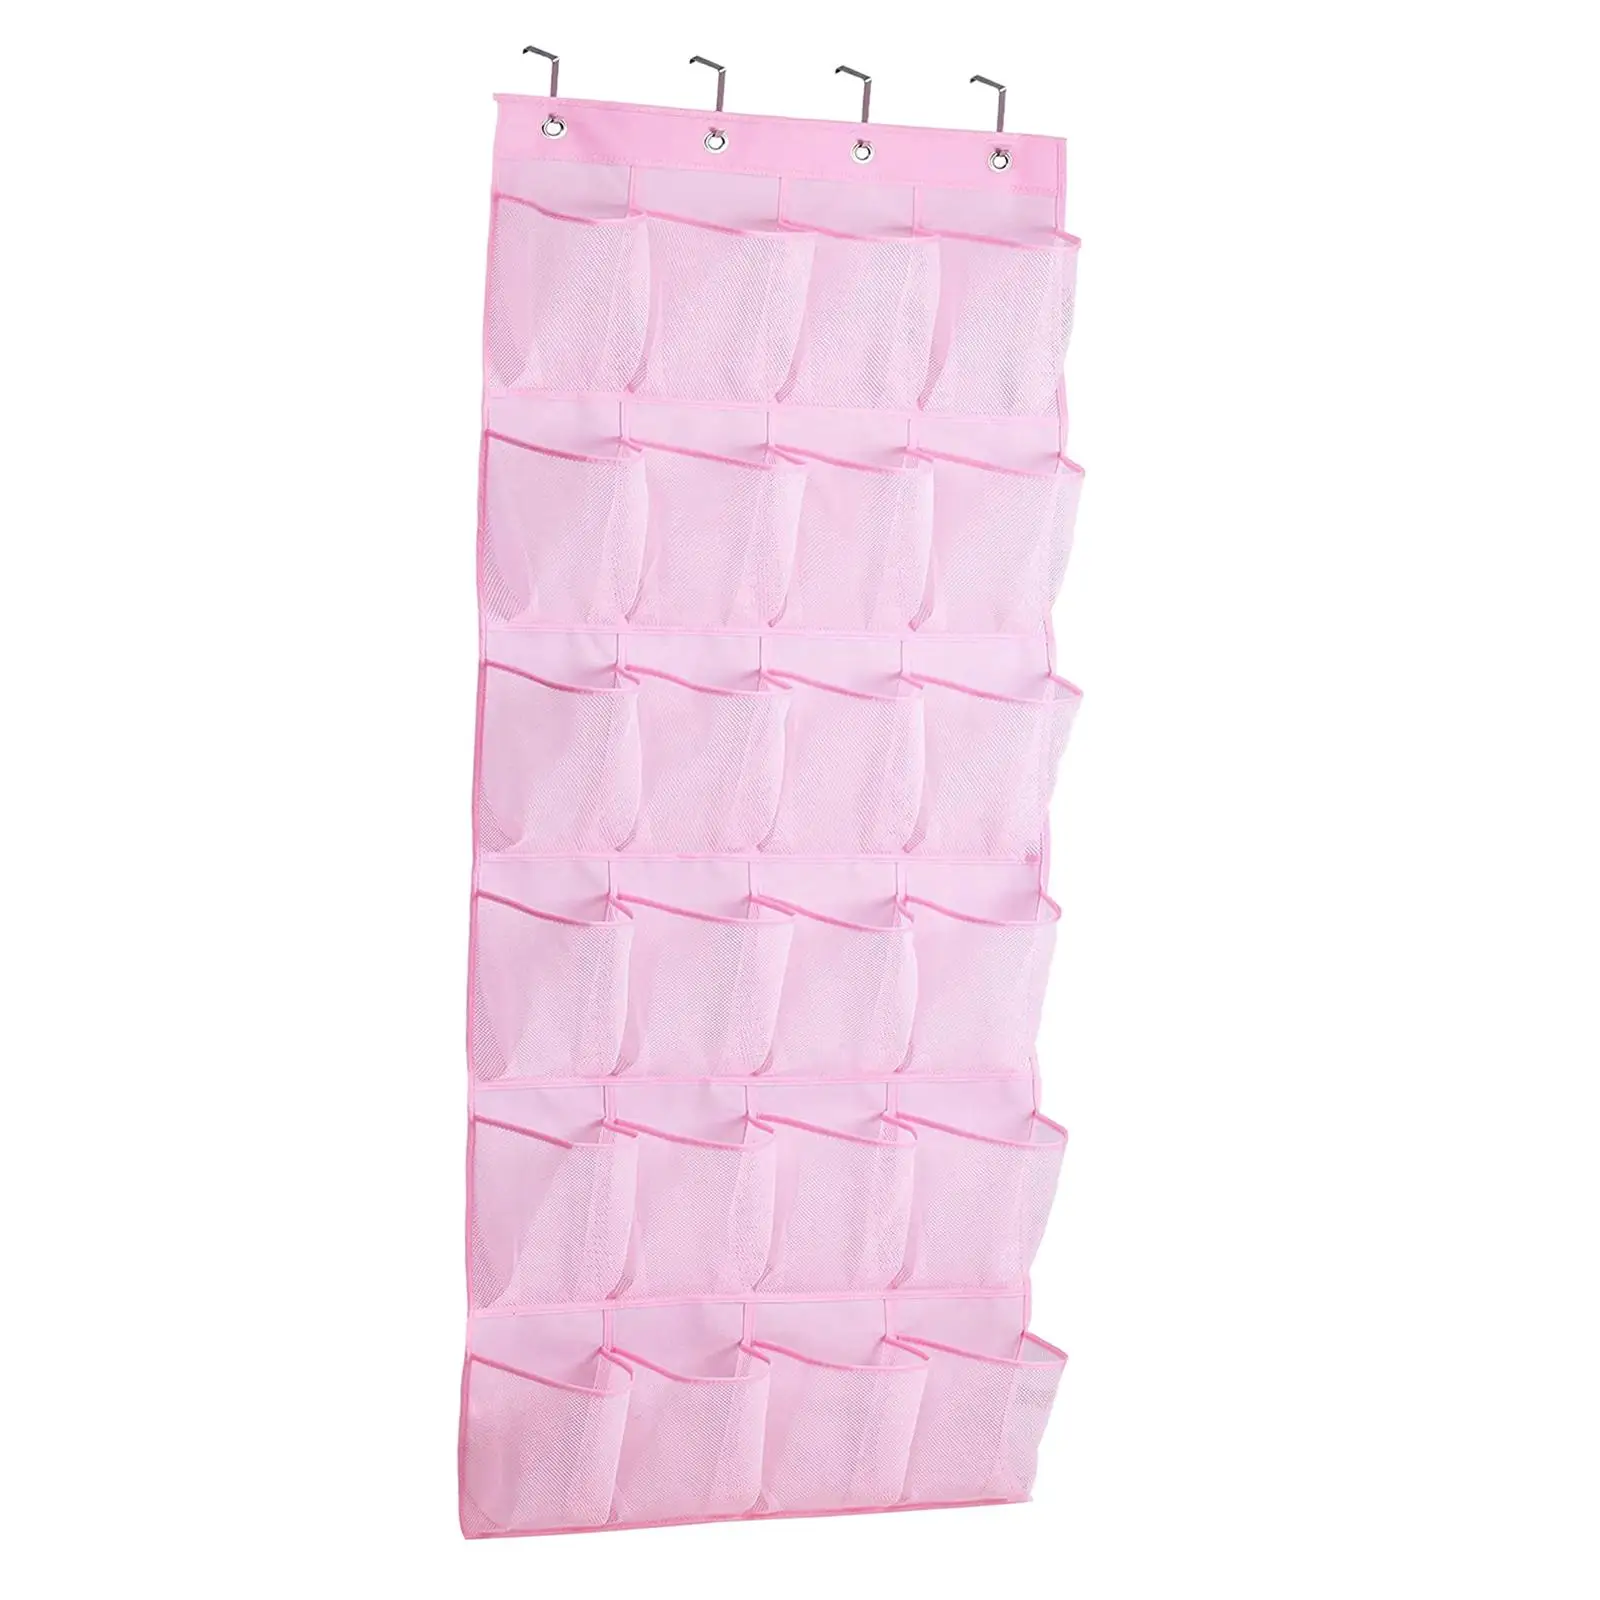 Hanging Shoe Organizer 4 Hooks Accessory 24 Pouches Foldable Durable Over The Door Hanging Shoe Organizer for Living Room Door